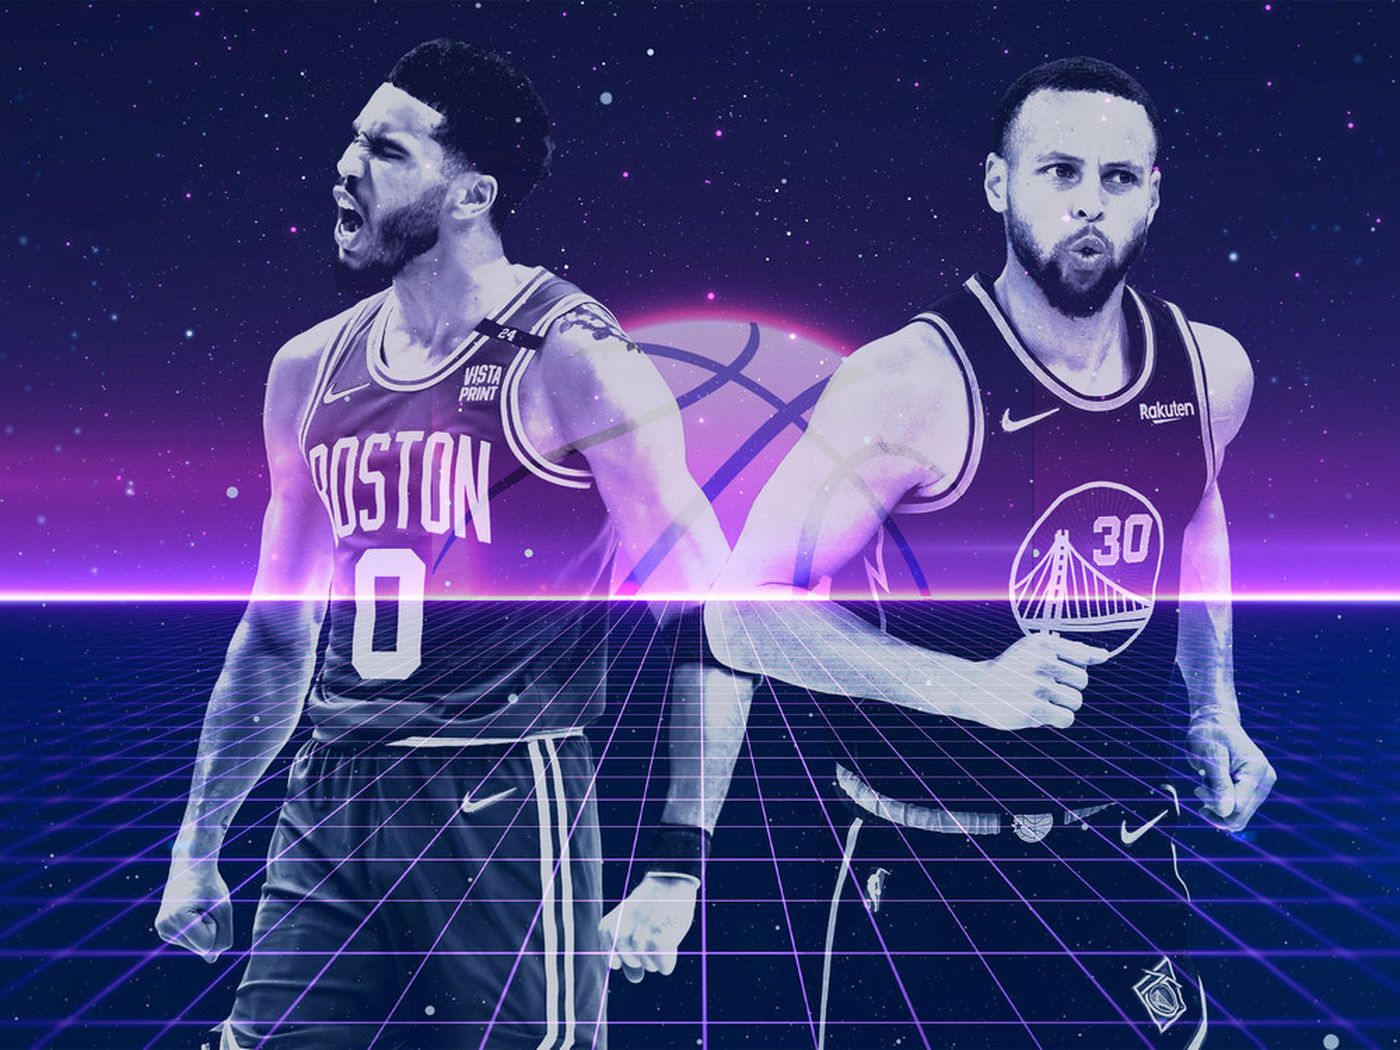 NBA Wallpapers HD 2022 APK for Android Download